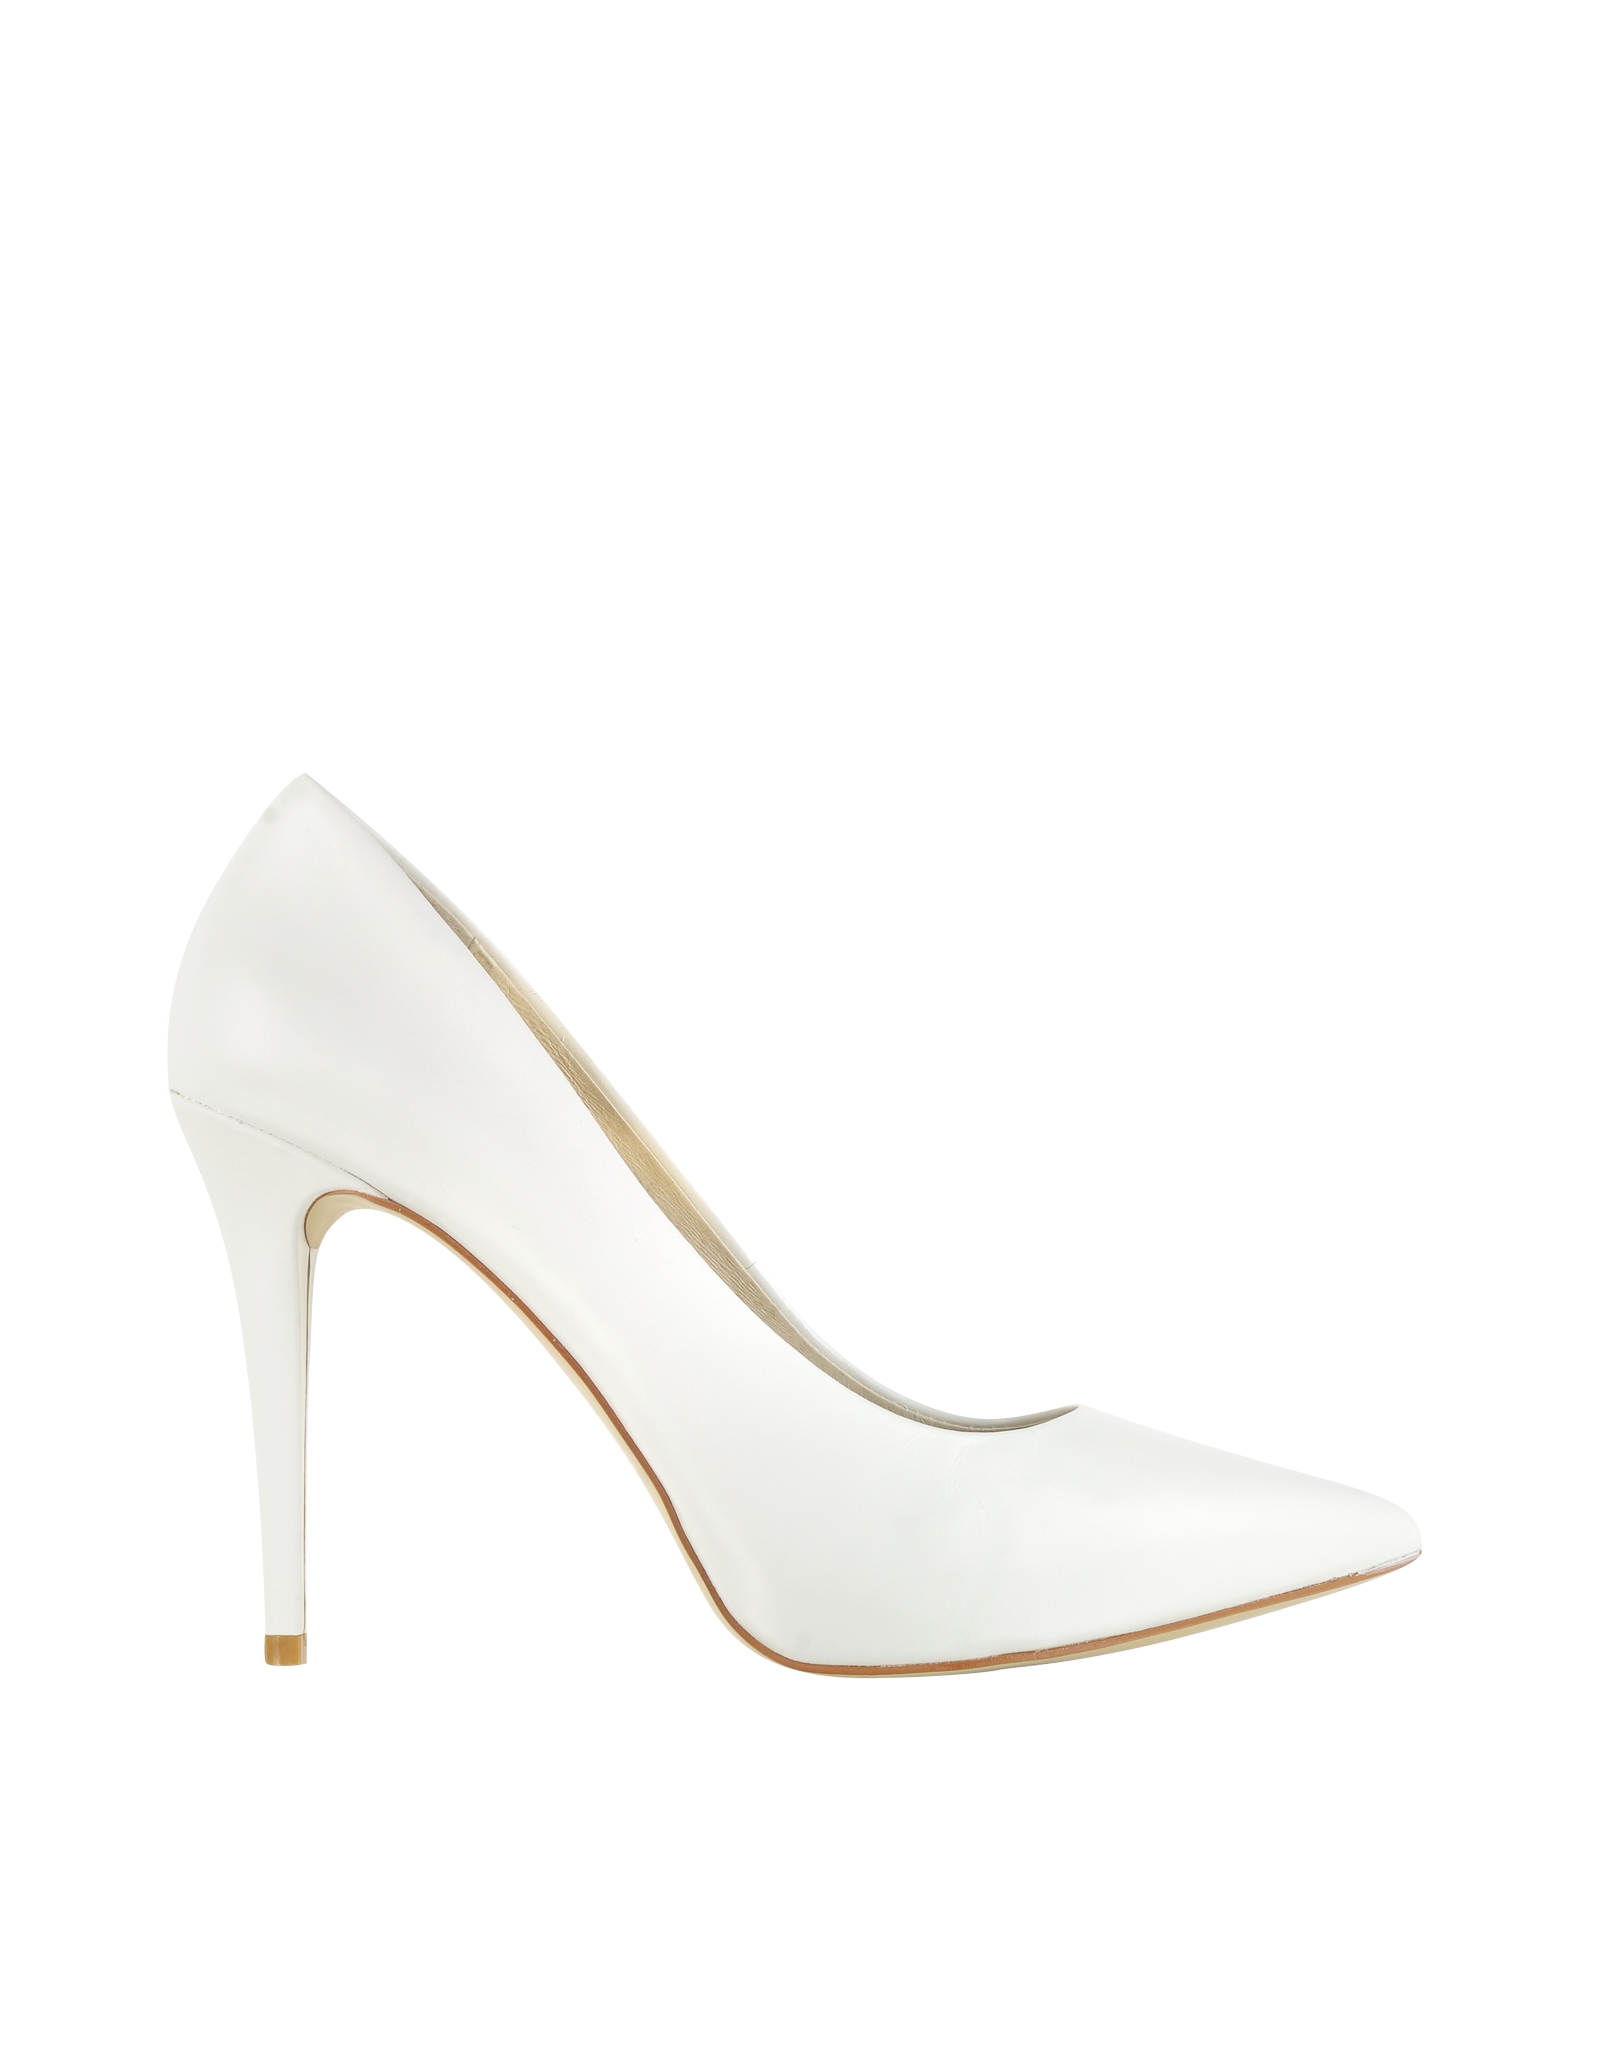 Lyst - Michael Kors Joselle Optic White Pointed toe Leather Pump in White